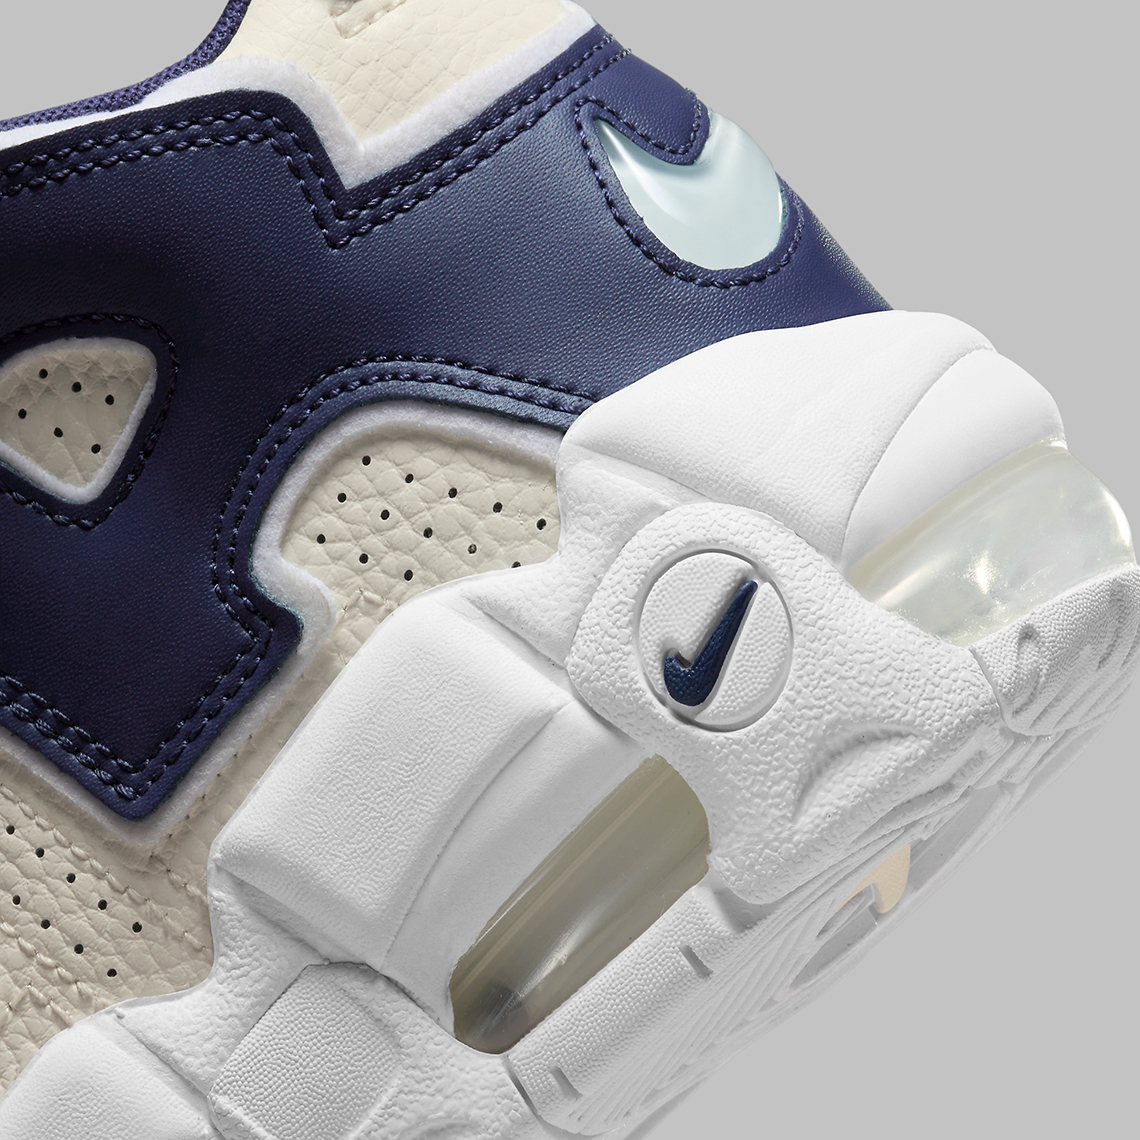 Subtle Hits Of Navy Blue Accent This Nike Air More Uptempo - Sneaker News